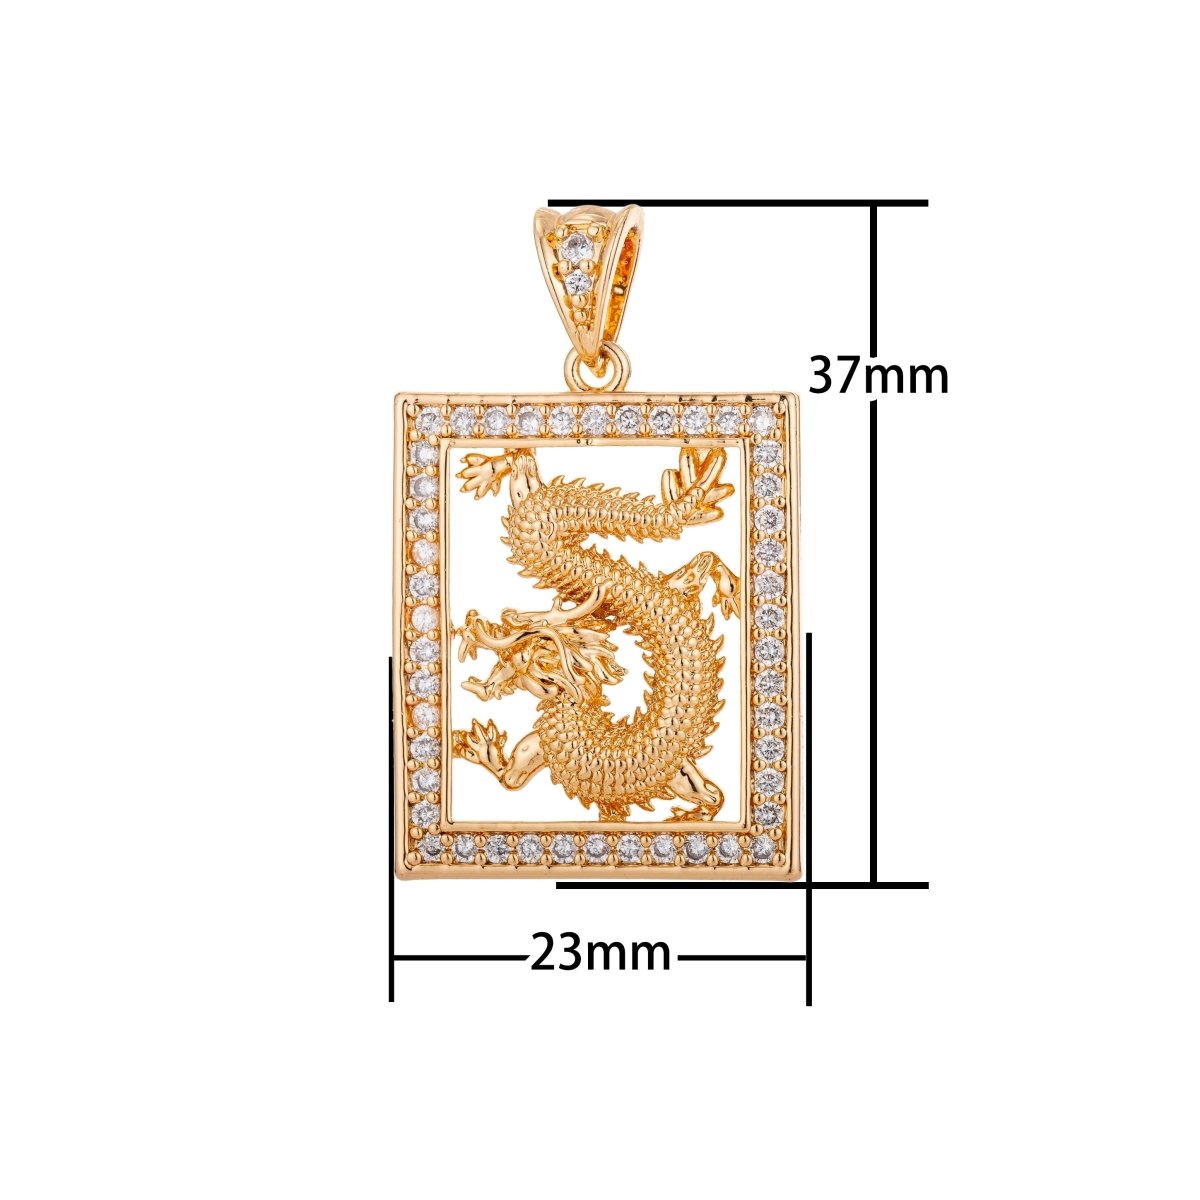 24K 18K Gold Filled or Rose Gold Majestic Dragon Charm Pendant with Bails Magical Creature Fairy Tale Cubic Zirconia Necklace for Jewelry Making H-802 - DLUXCA